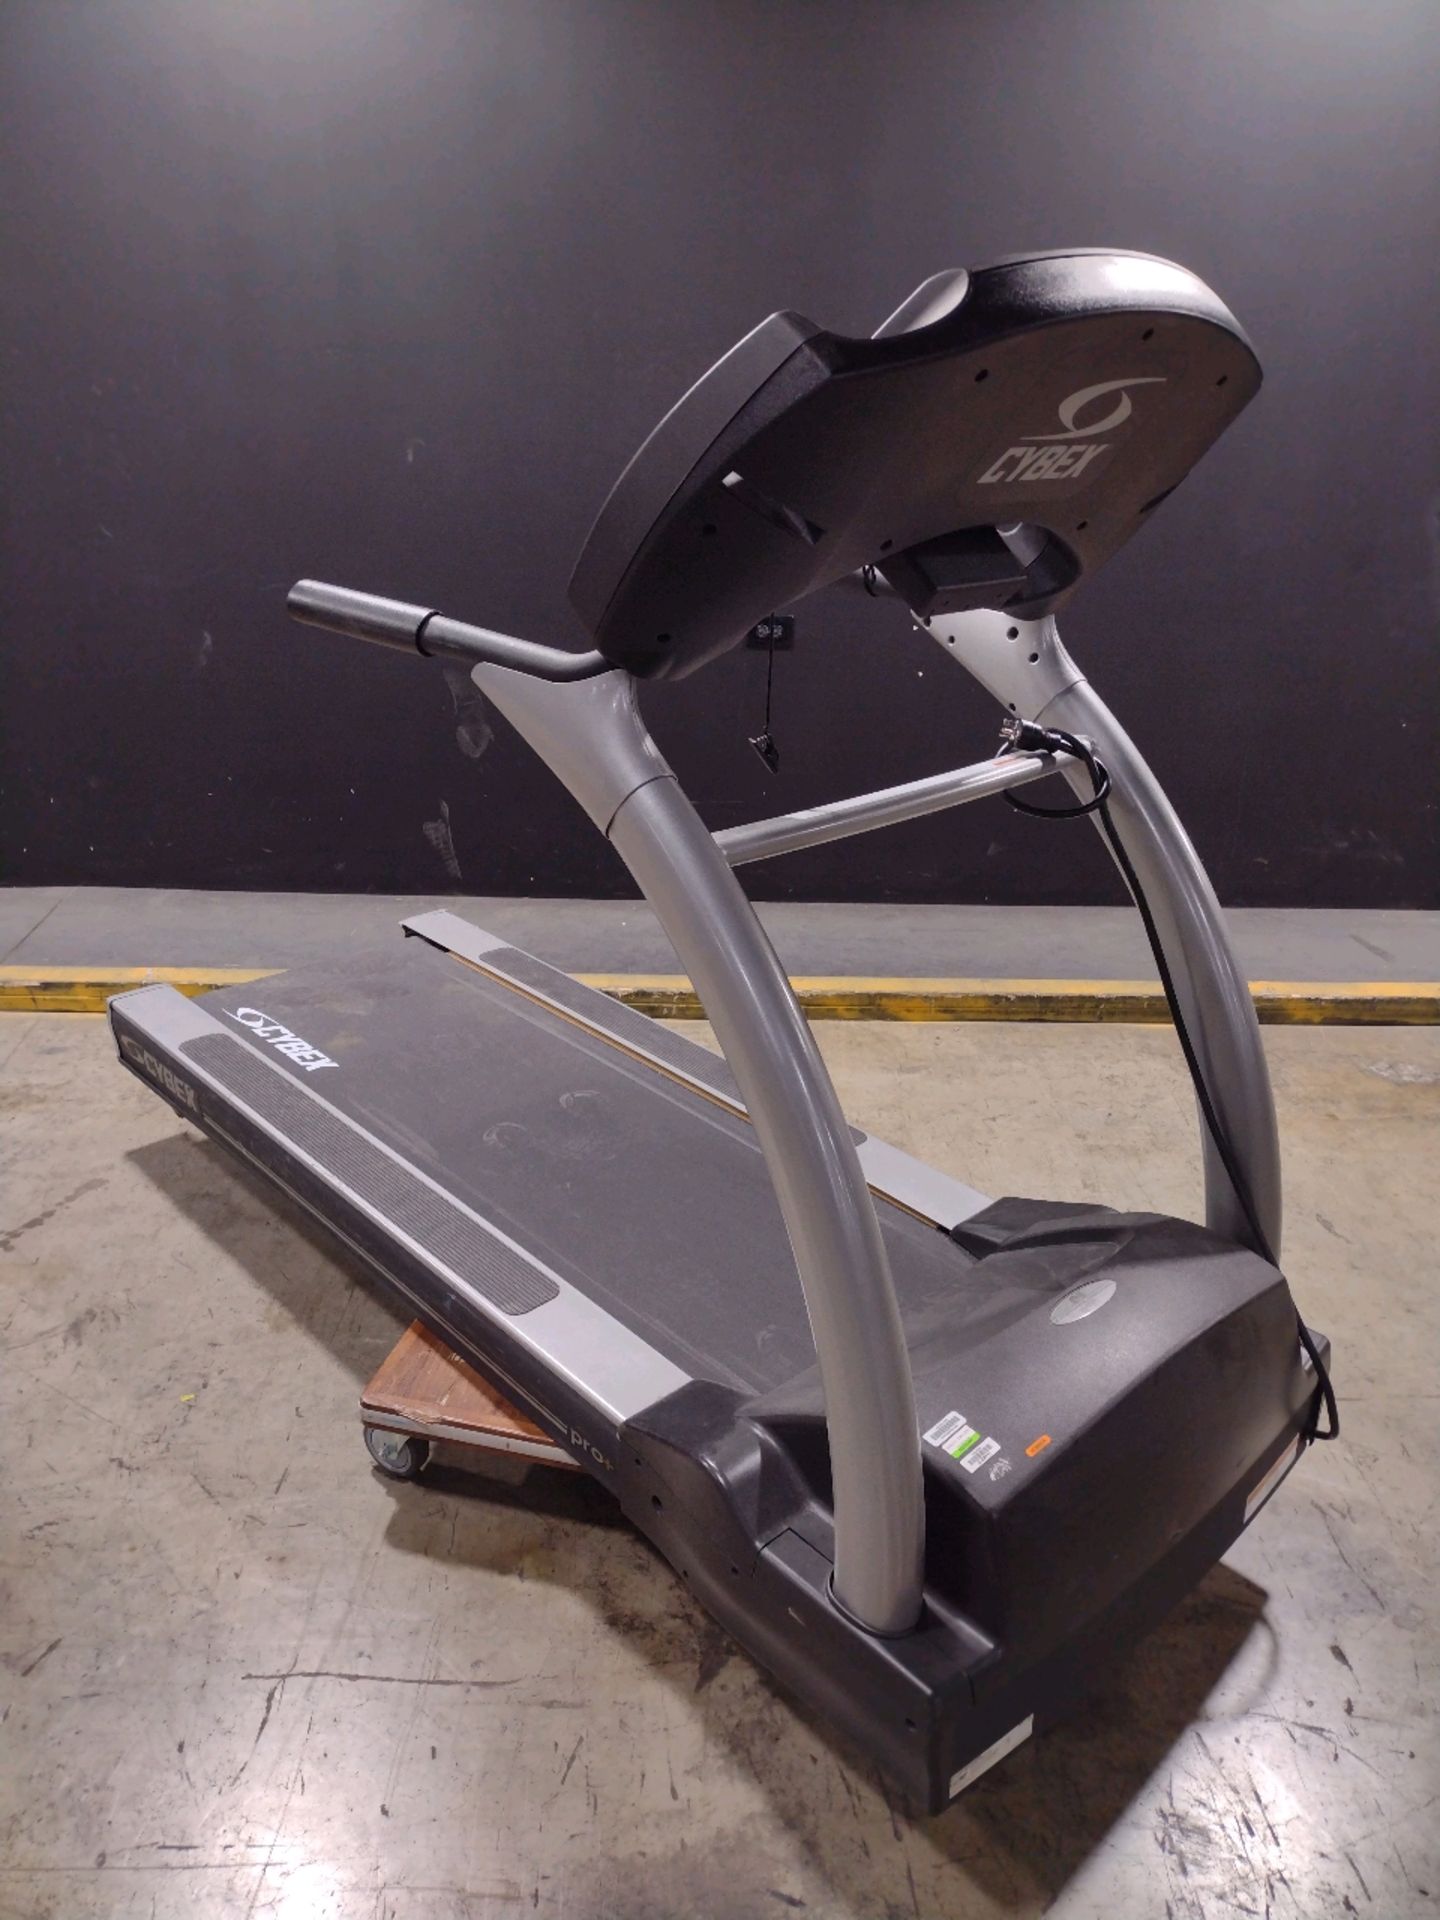 CYBEX PRO PLUS TREADMILL (LOCATED AT 3325 MOUNT PROSPECT ROAD, FRANKLIN PARK, IL, 60131) - Image 3 of 3